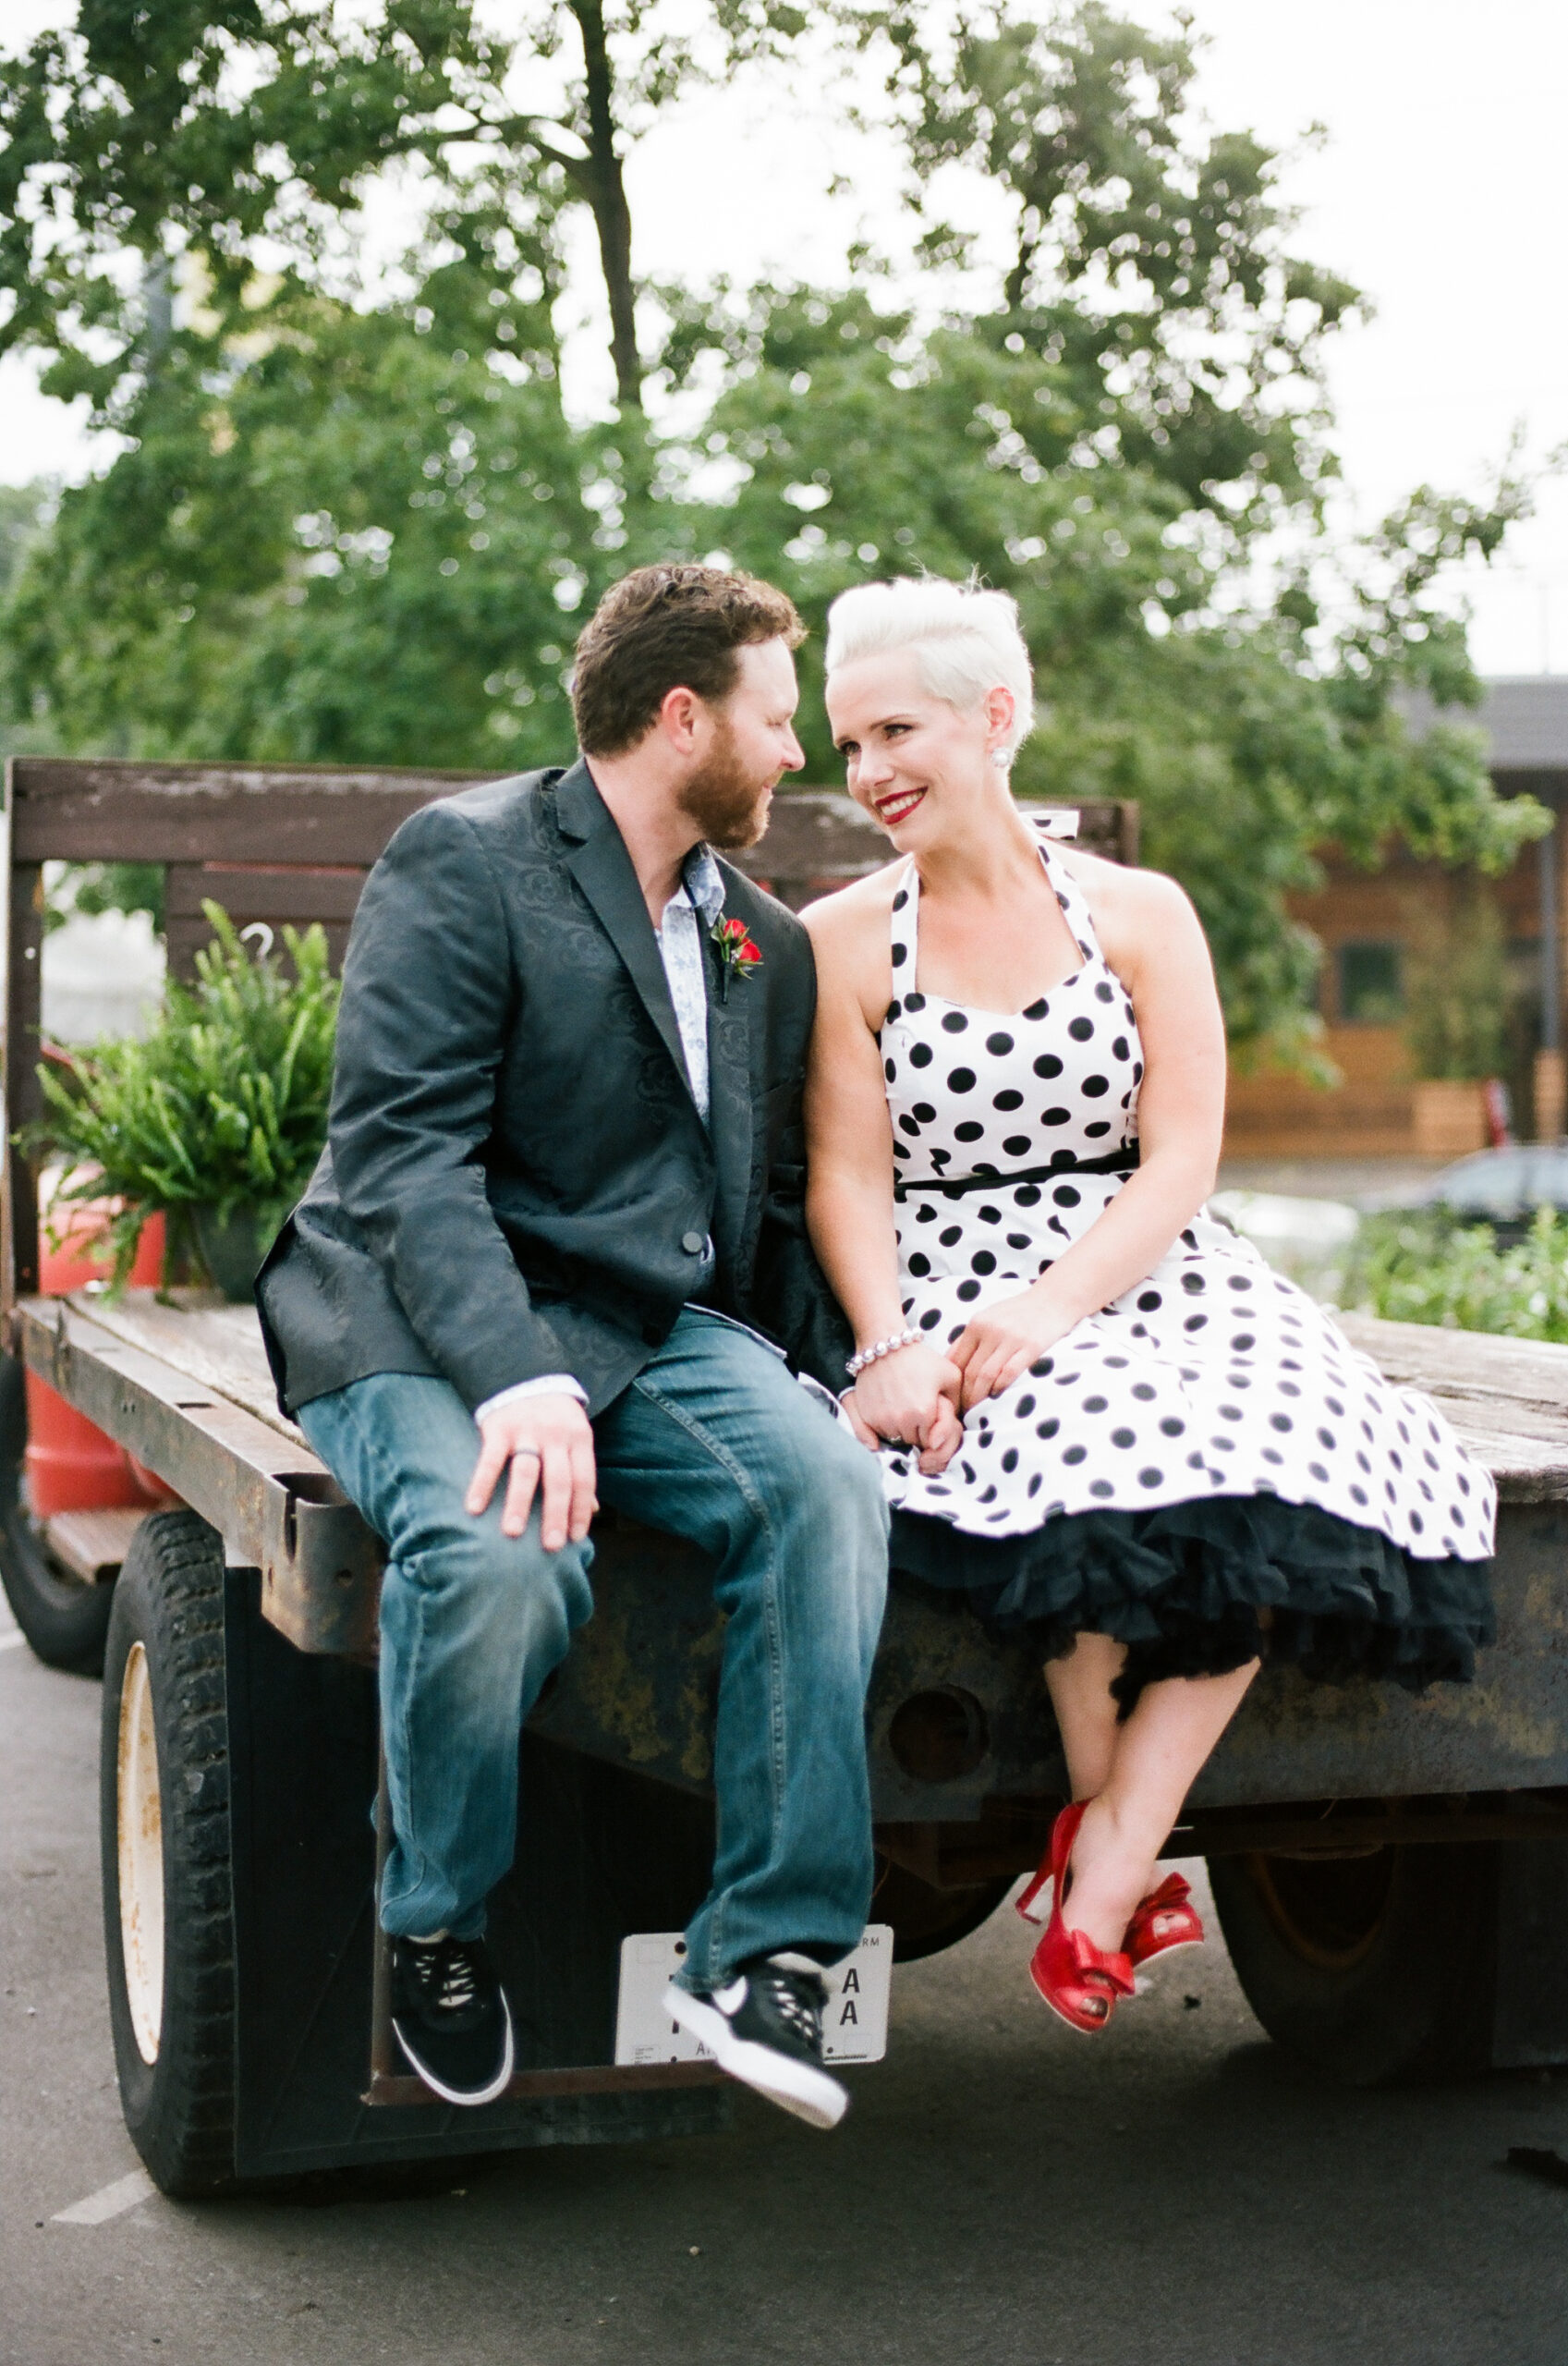 Sitting on the back of a flatbed pickup truck with ferns in the back, the bride and groom gaze into each other's eyes. The bride is wearing a halter neck white pinup dress with black polka dots. She has a black belt and a black crinoline petticoat. The bride has bright red lipstick to match her bright red peep toe shoes with a small bow. The groom is wearing a black silk suit jacket with a paisley pattern, a white shirt with small blue flowers, a red rose boutonniere and dark washed jeans. 